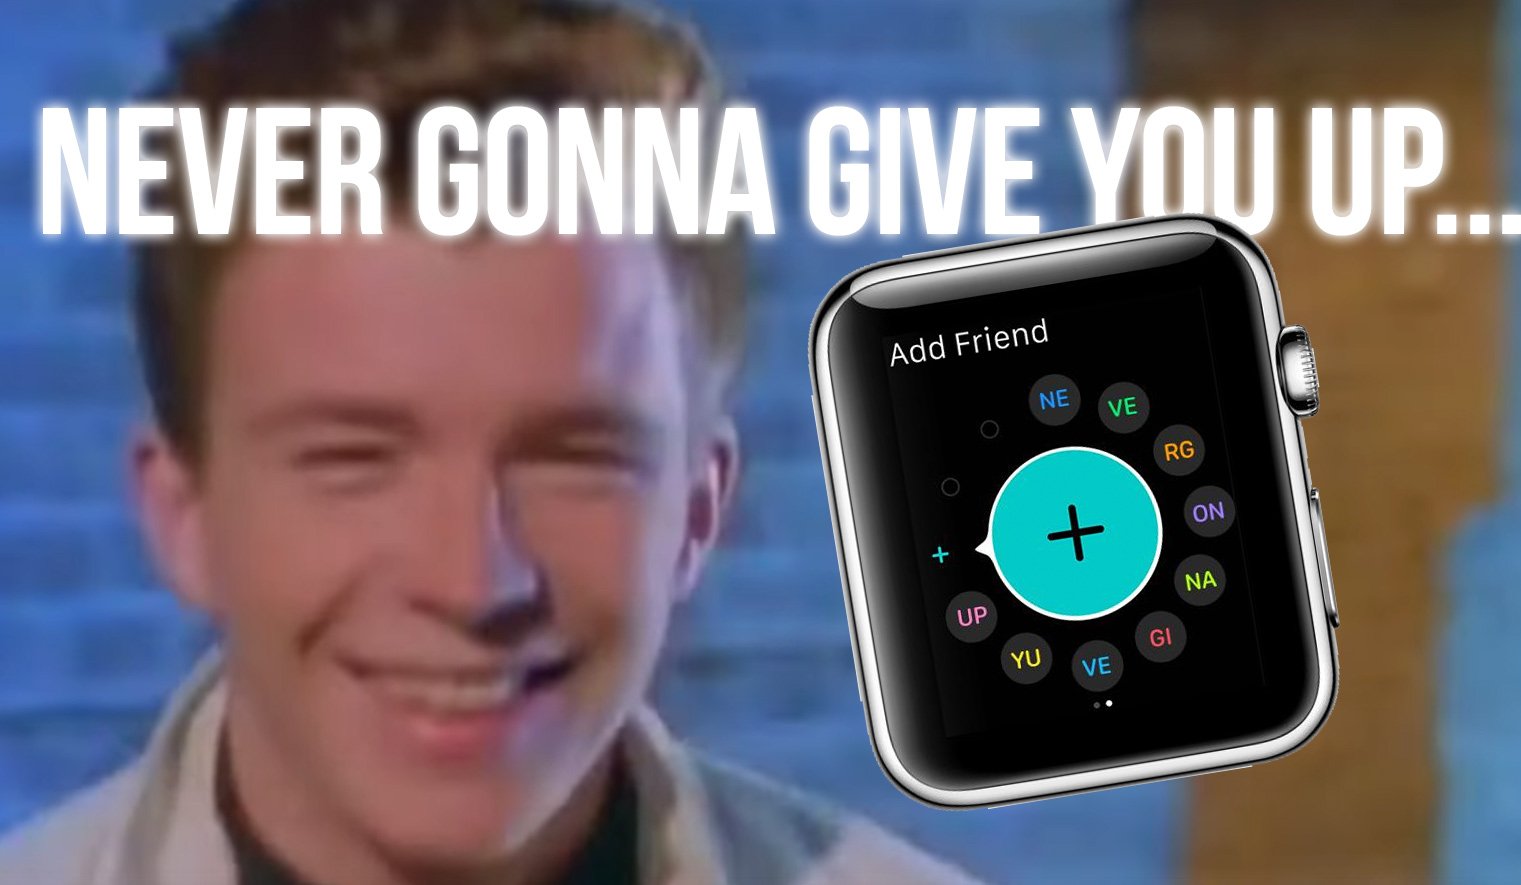 Apple mit Easter-Egg in Apple Watch: Rick Astley - Never gonna give you up! 5